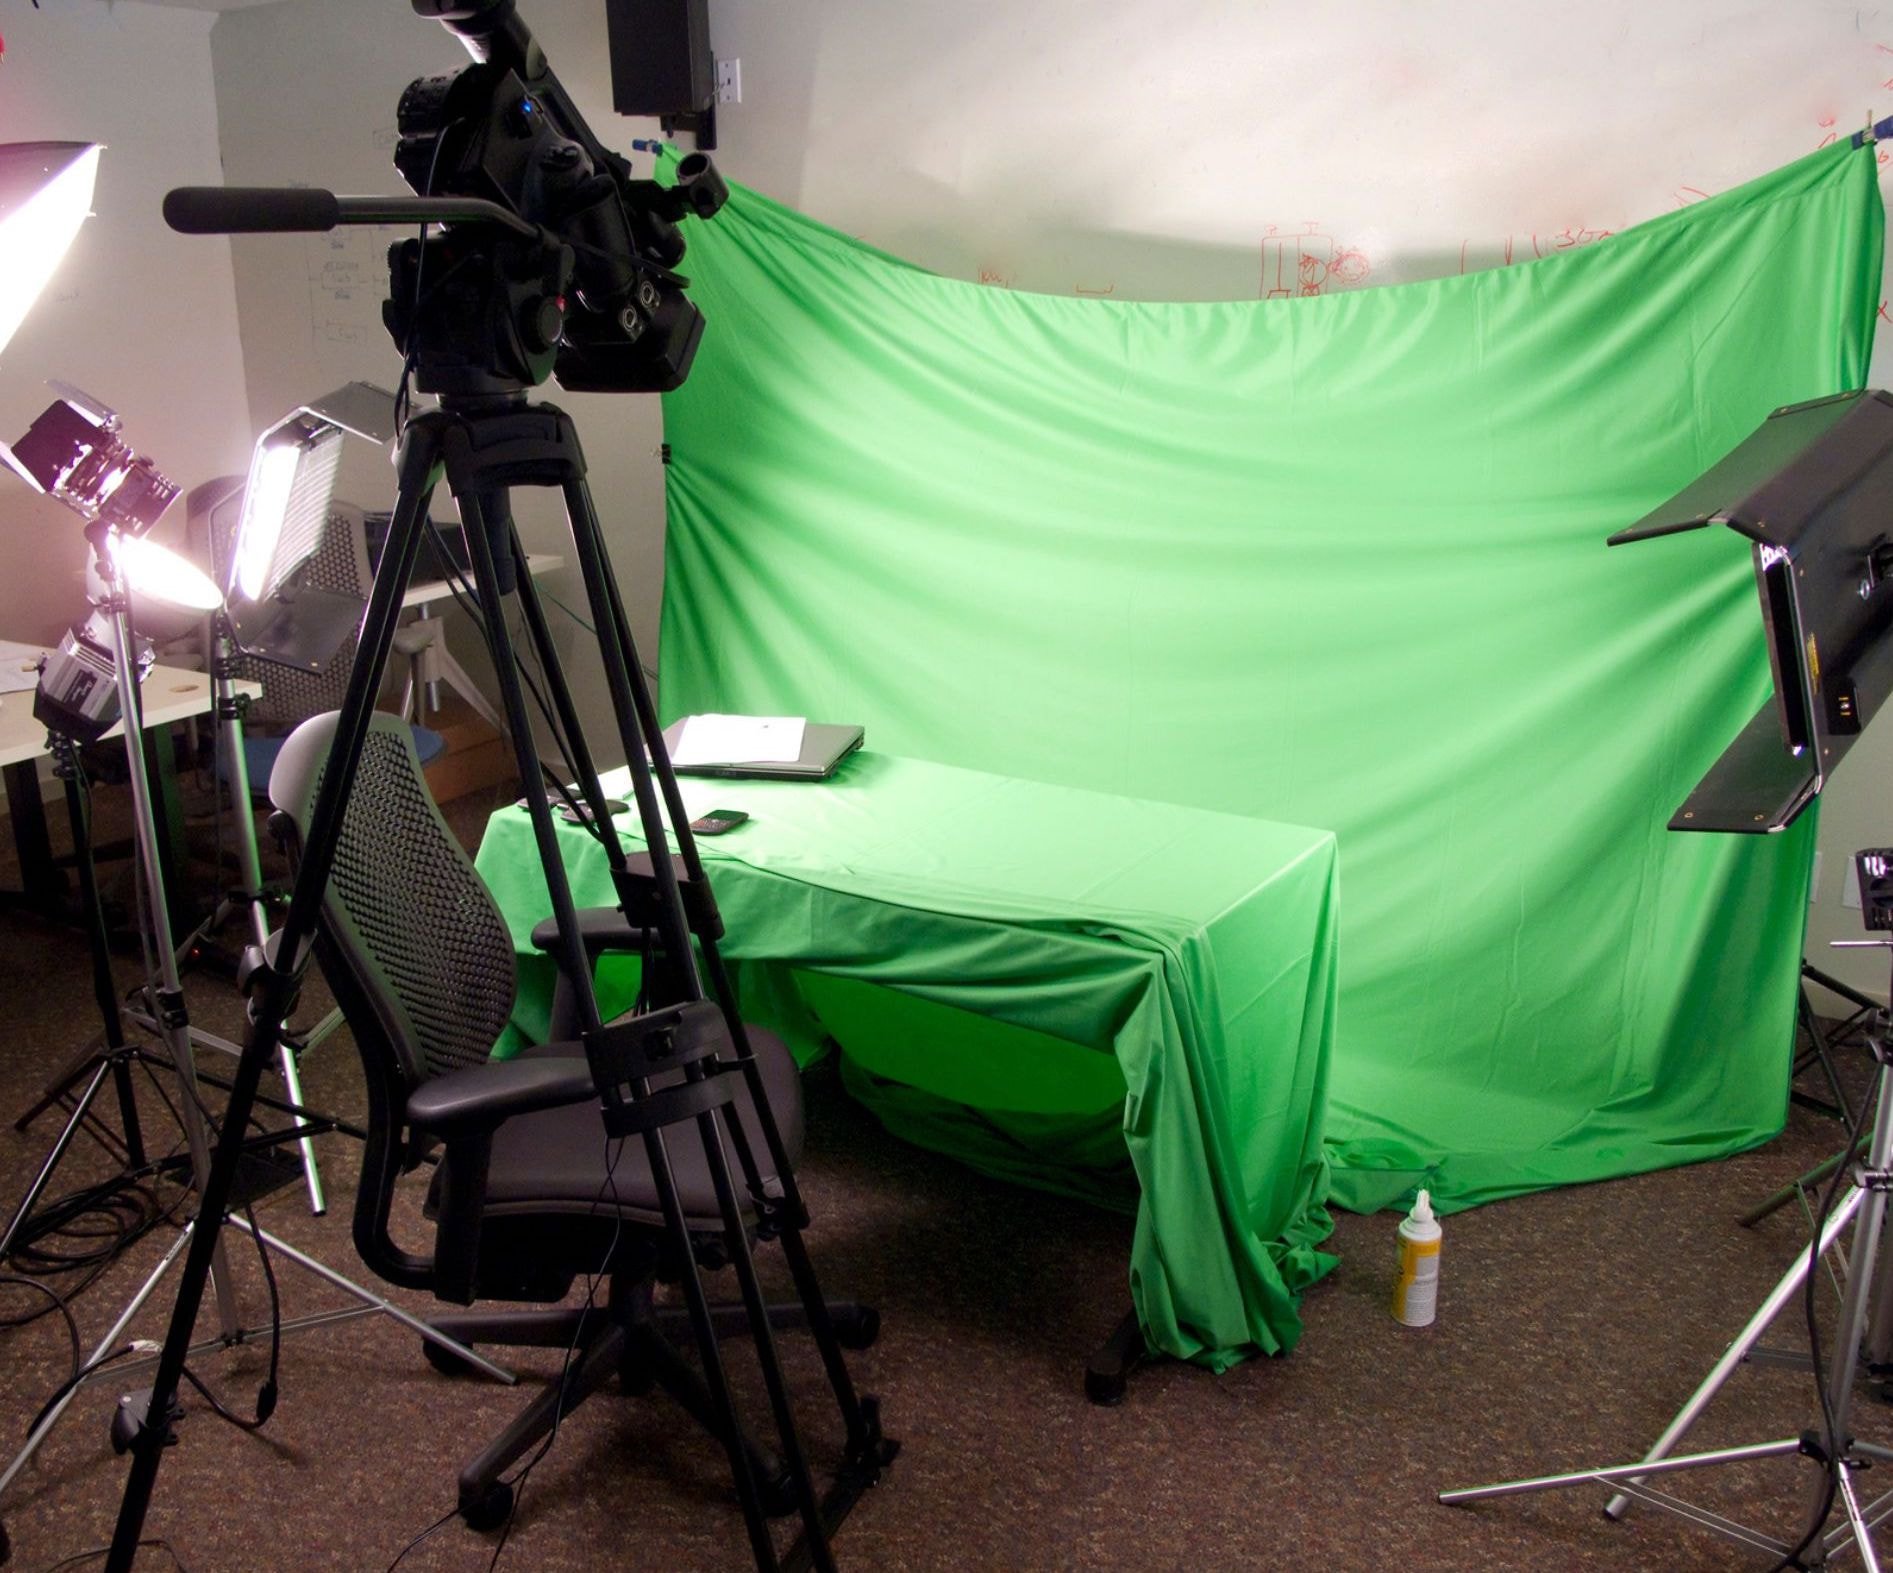 4. Adding A Green Screen To A Video